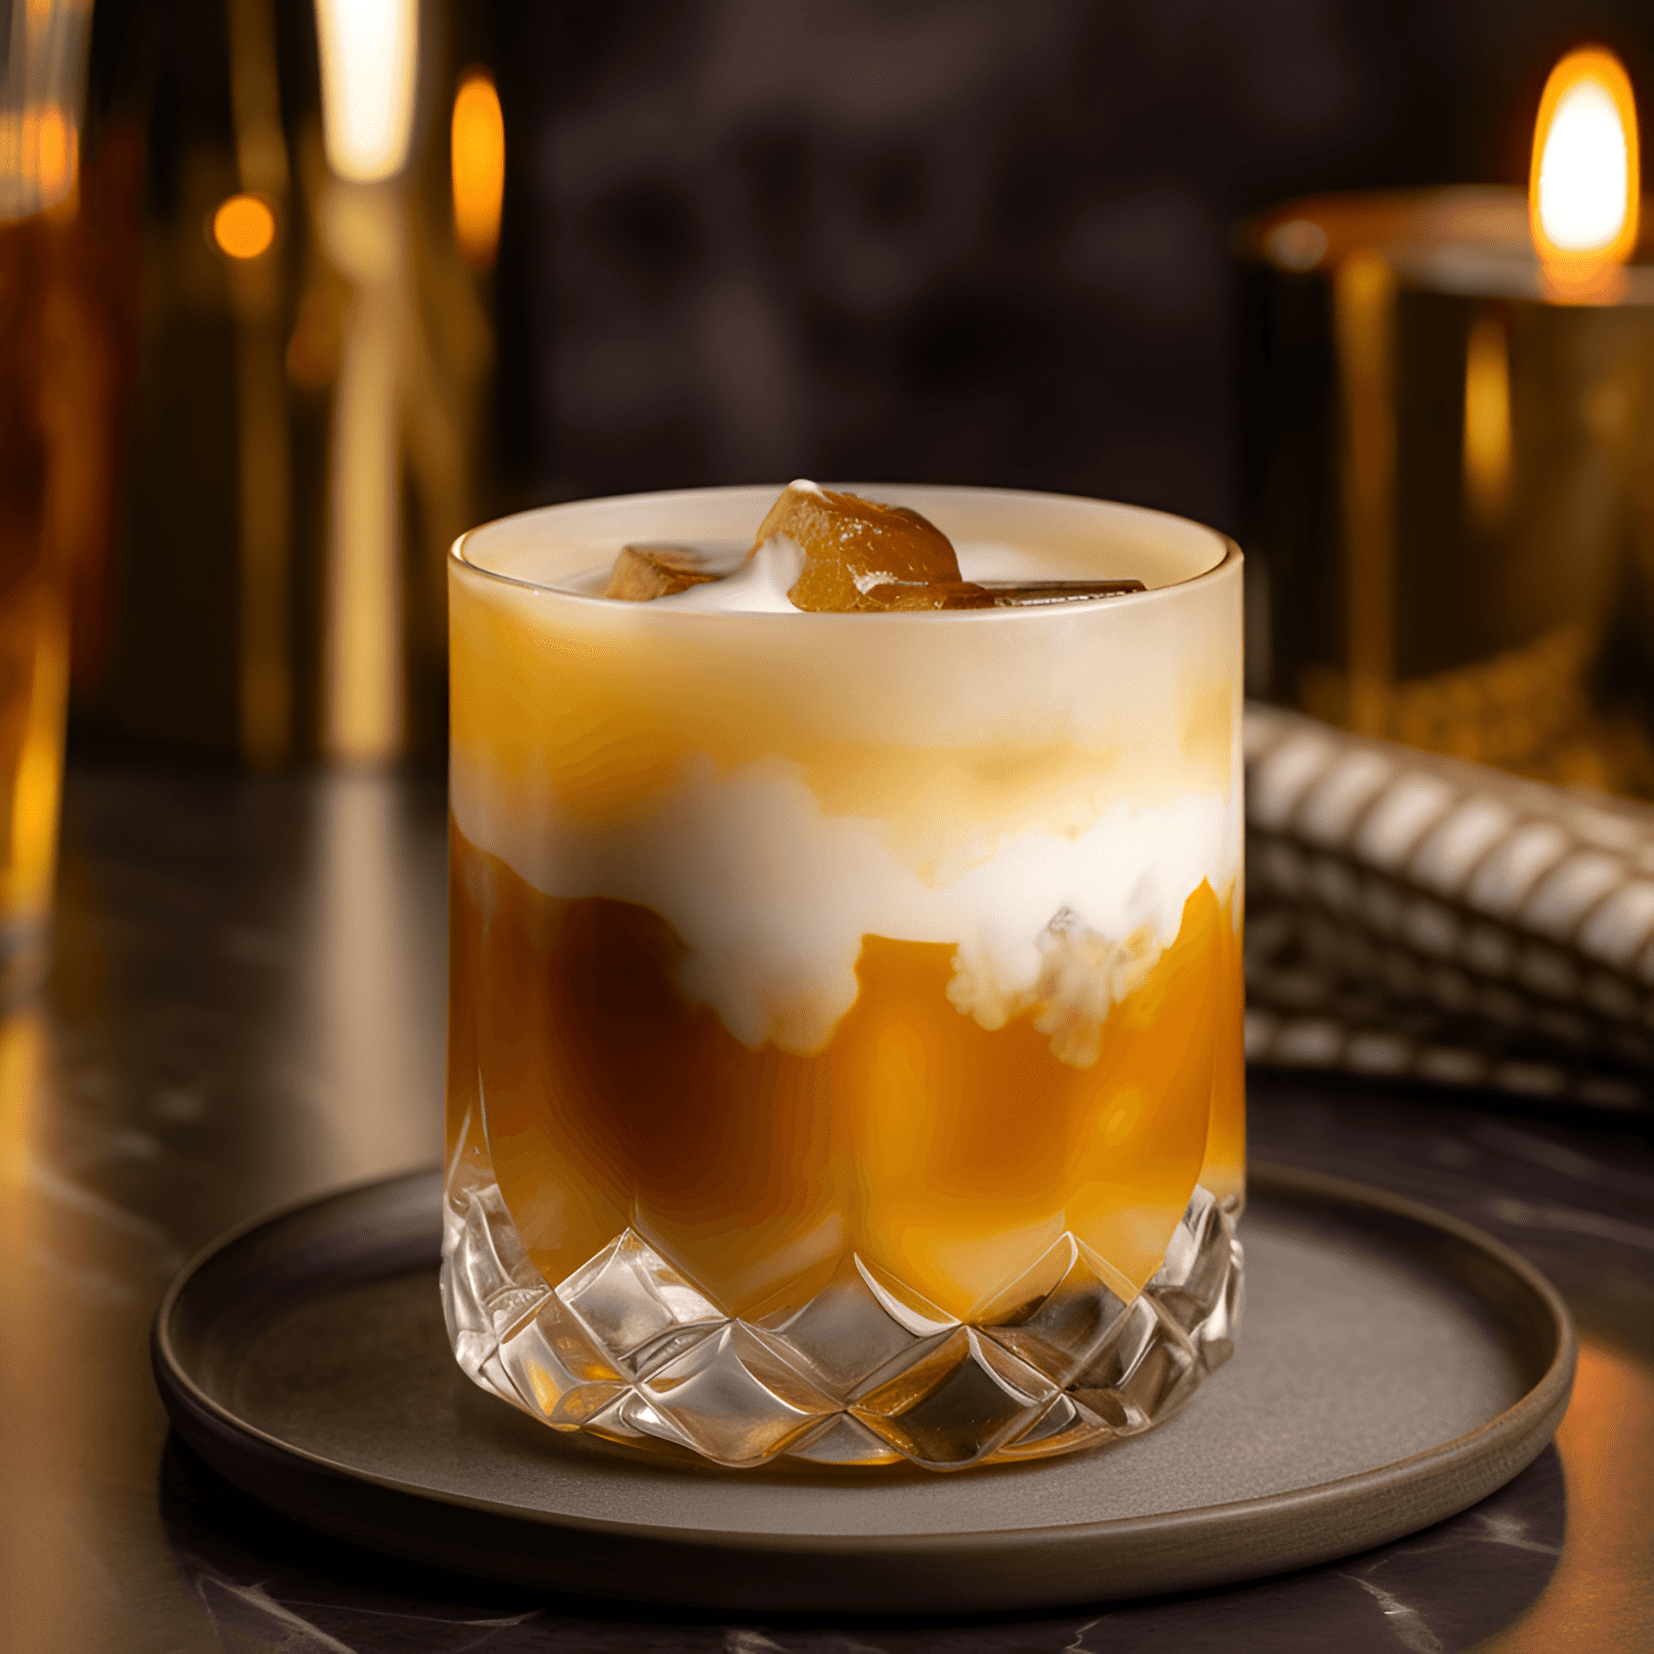 Scotch Sour Cocktail Recipe - The Scotch Sour has a complex and well-balanced taste, featuring the smoky and peaty flavors of Scotch whisky, the tartness of lemon juice, and the sweetness of simple syrup. It is a sour, slightly sweet, and robust cocktail with a smooth and velvety texture.